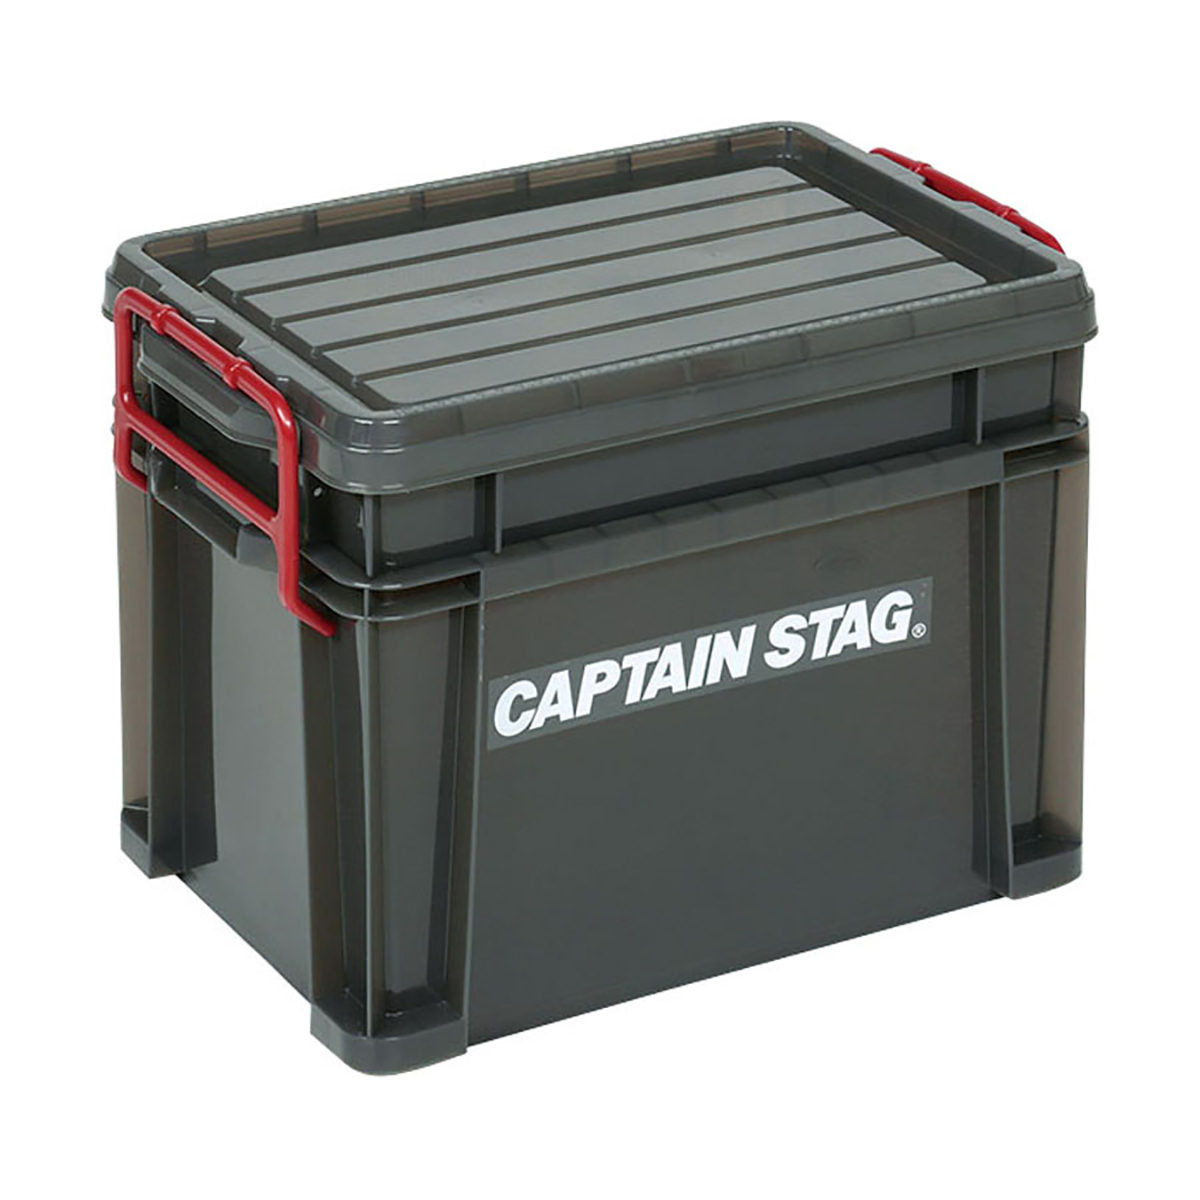 CAPTAIN STAG OUTDOOR TOOLBOX M